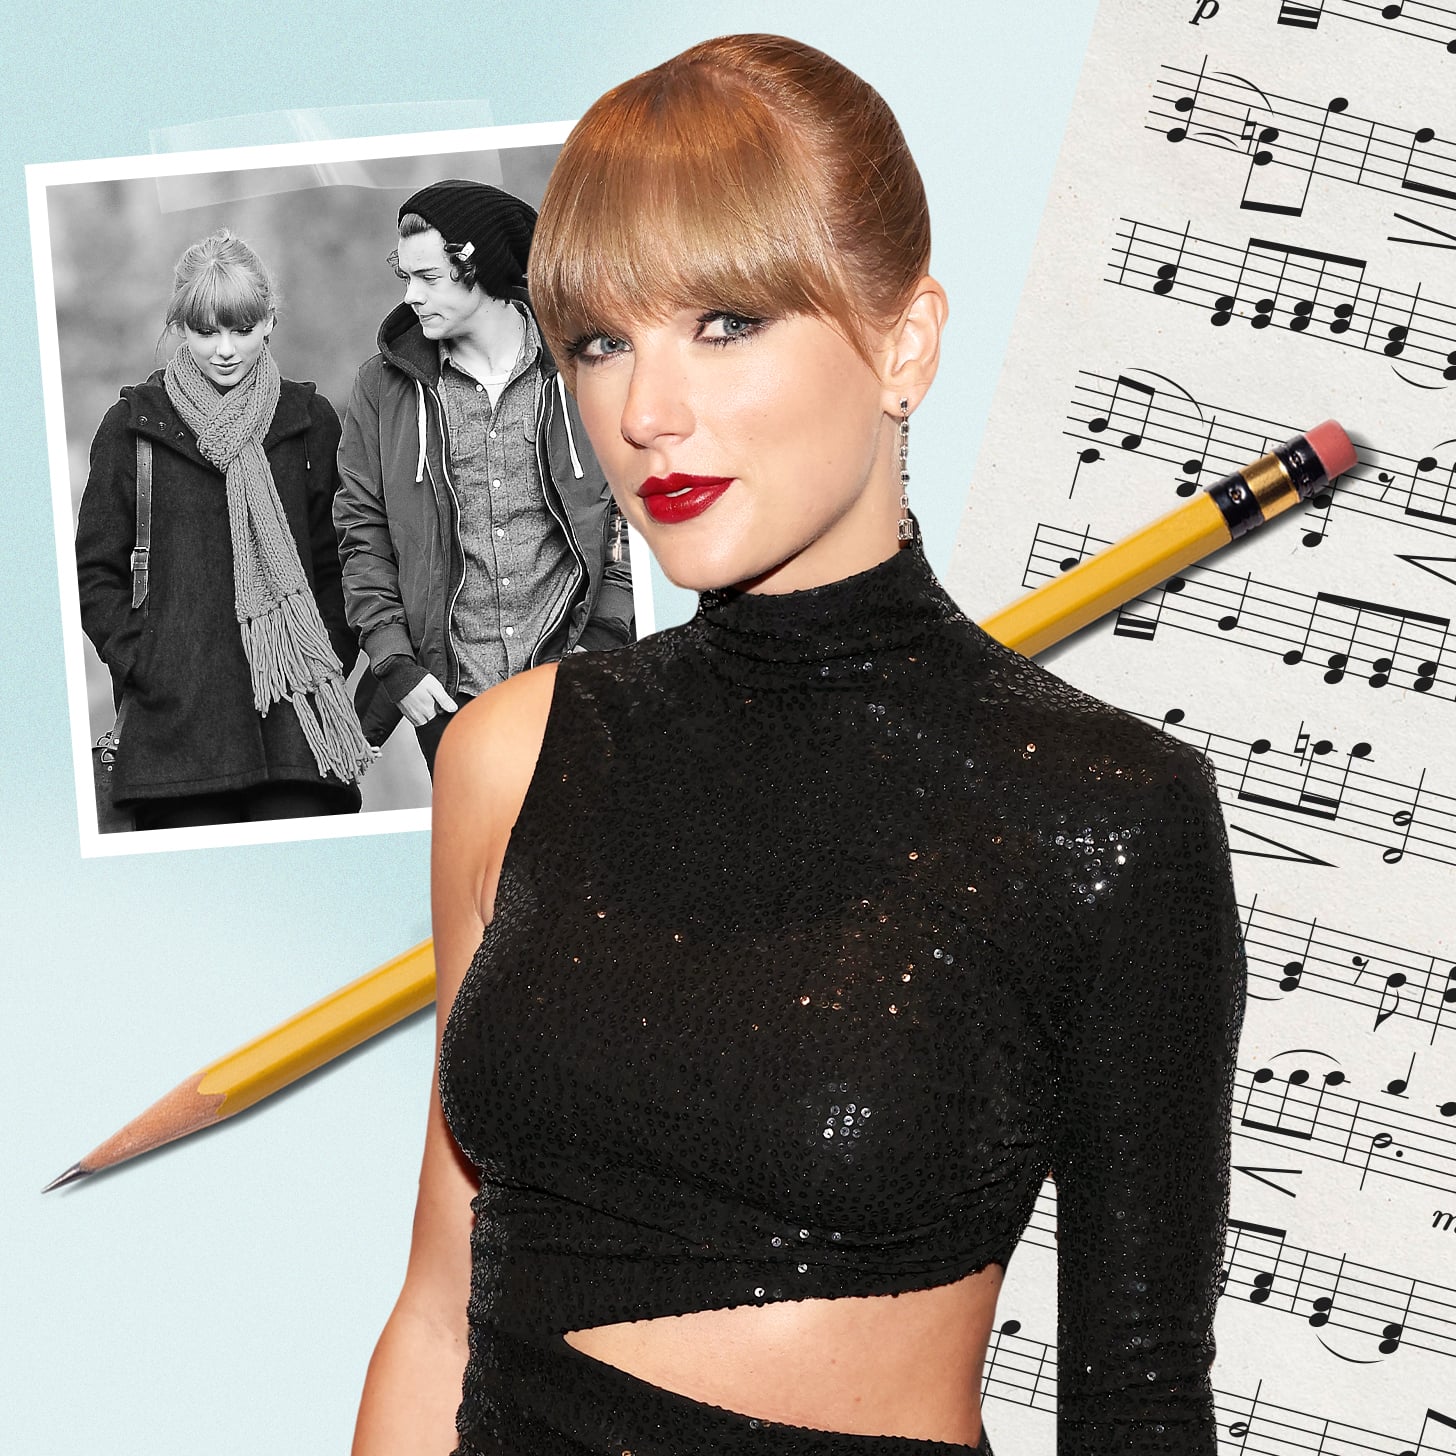 16 Taylor Swift Lyrics That Work Even Better as Pick-Up Lines – SheKnows